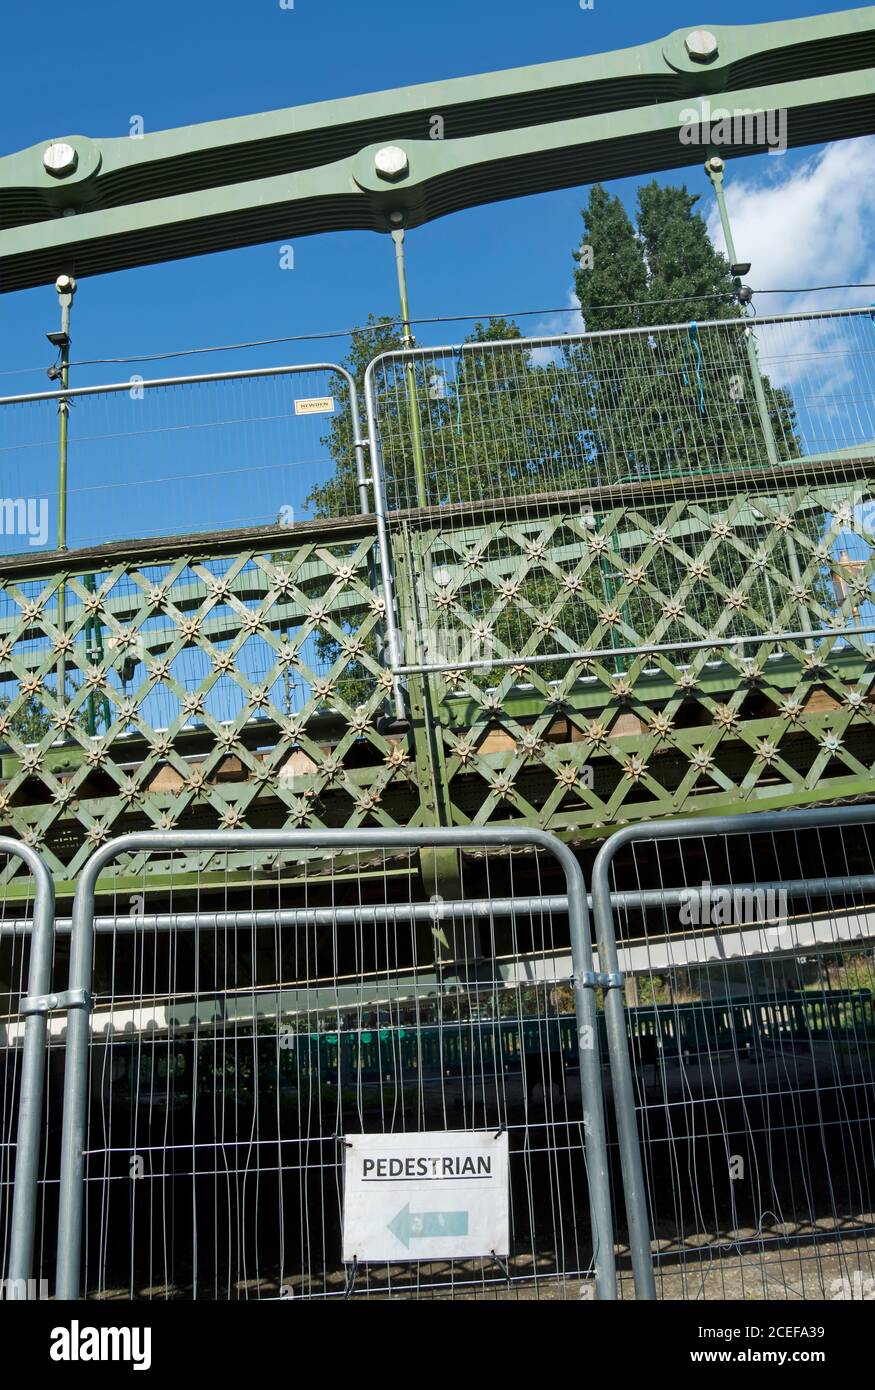 barriers preventing access to the towpath beneath hammersmith bridge, london, england, following structural safety issues during bridge repair Stock Photo